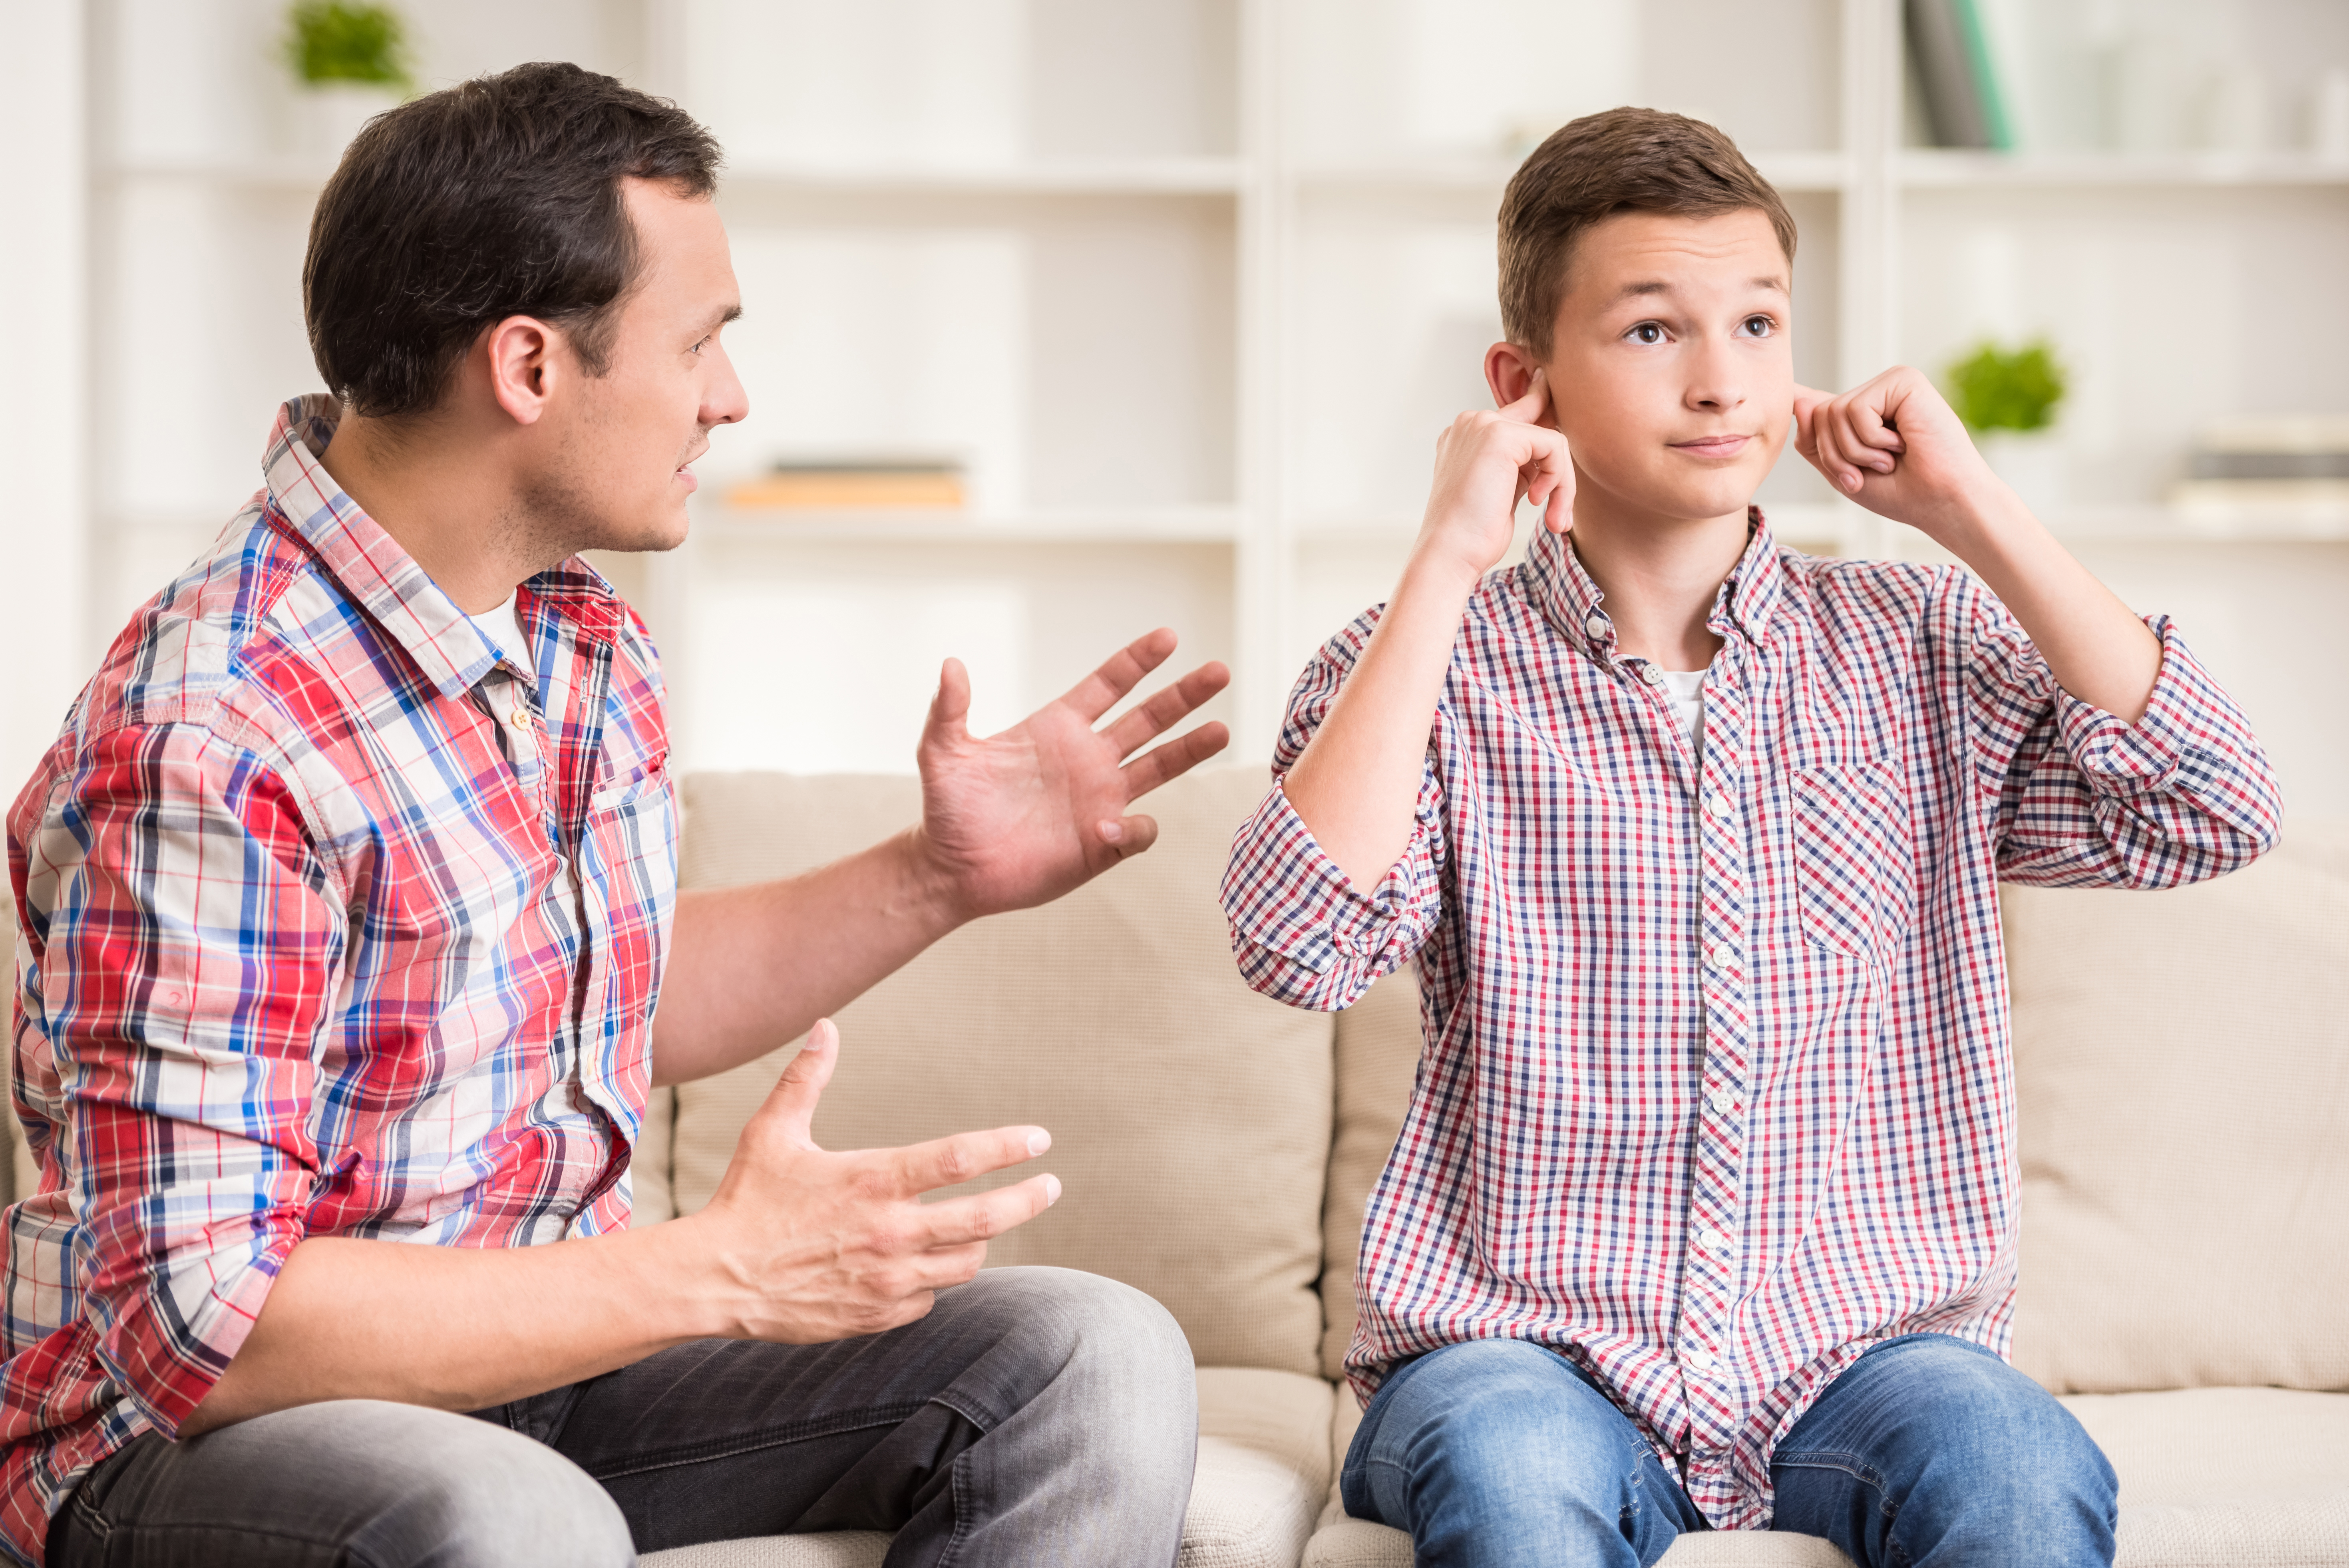 Son closing his ears to his father's lecture. | Source: Shutterstock